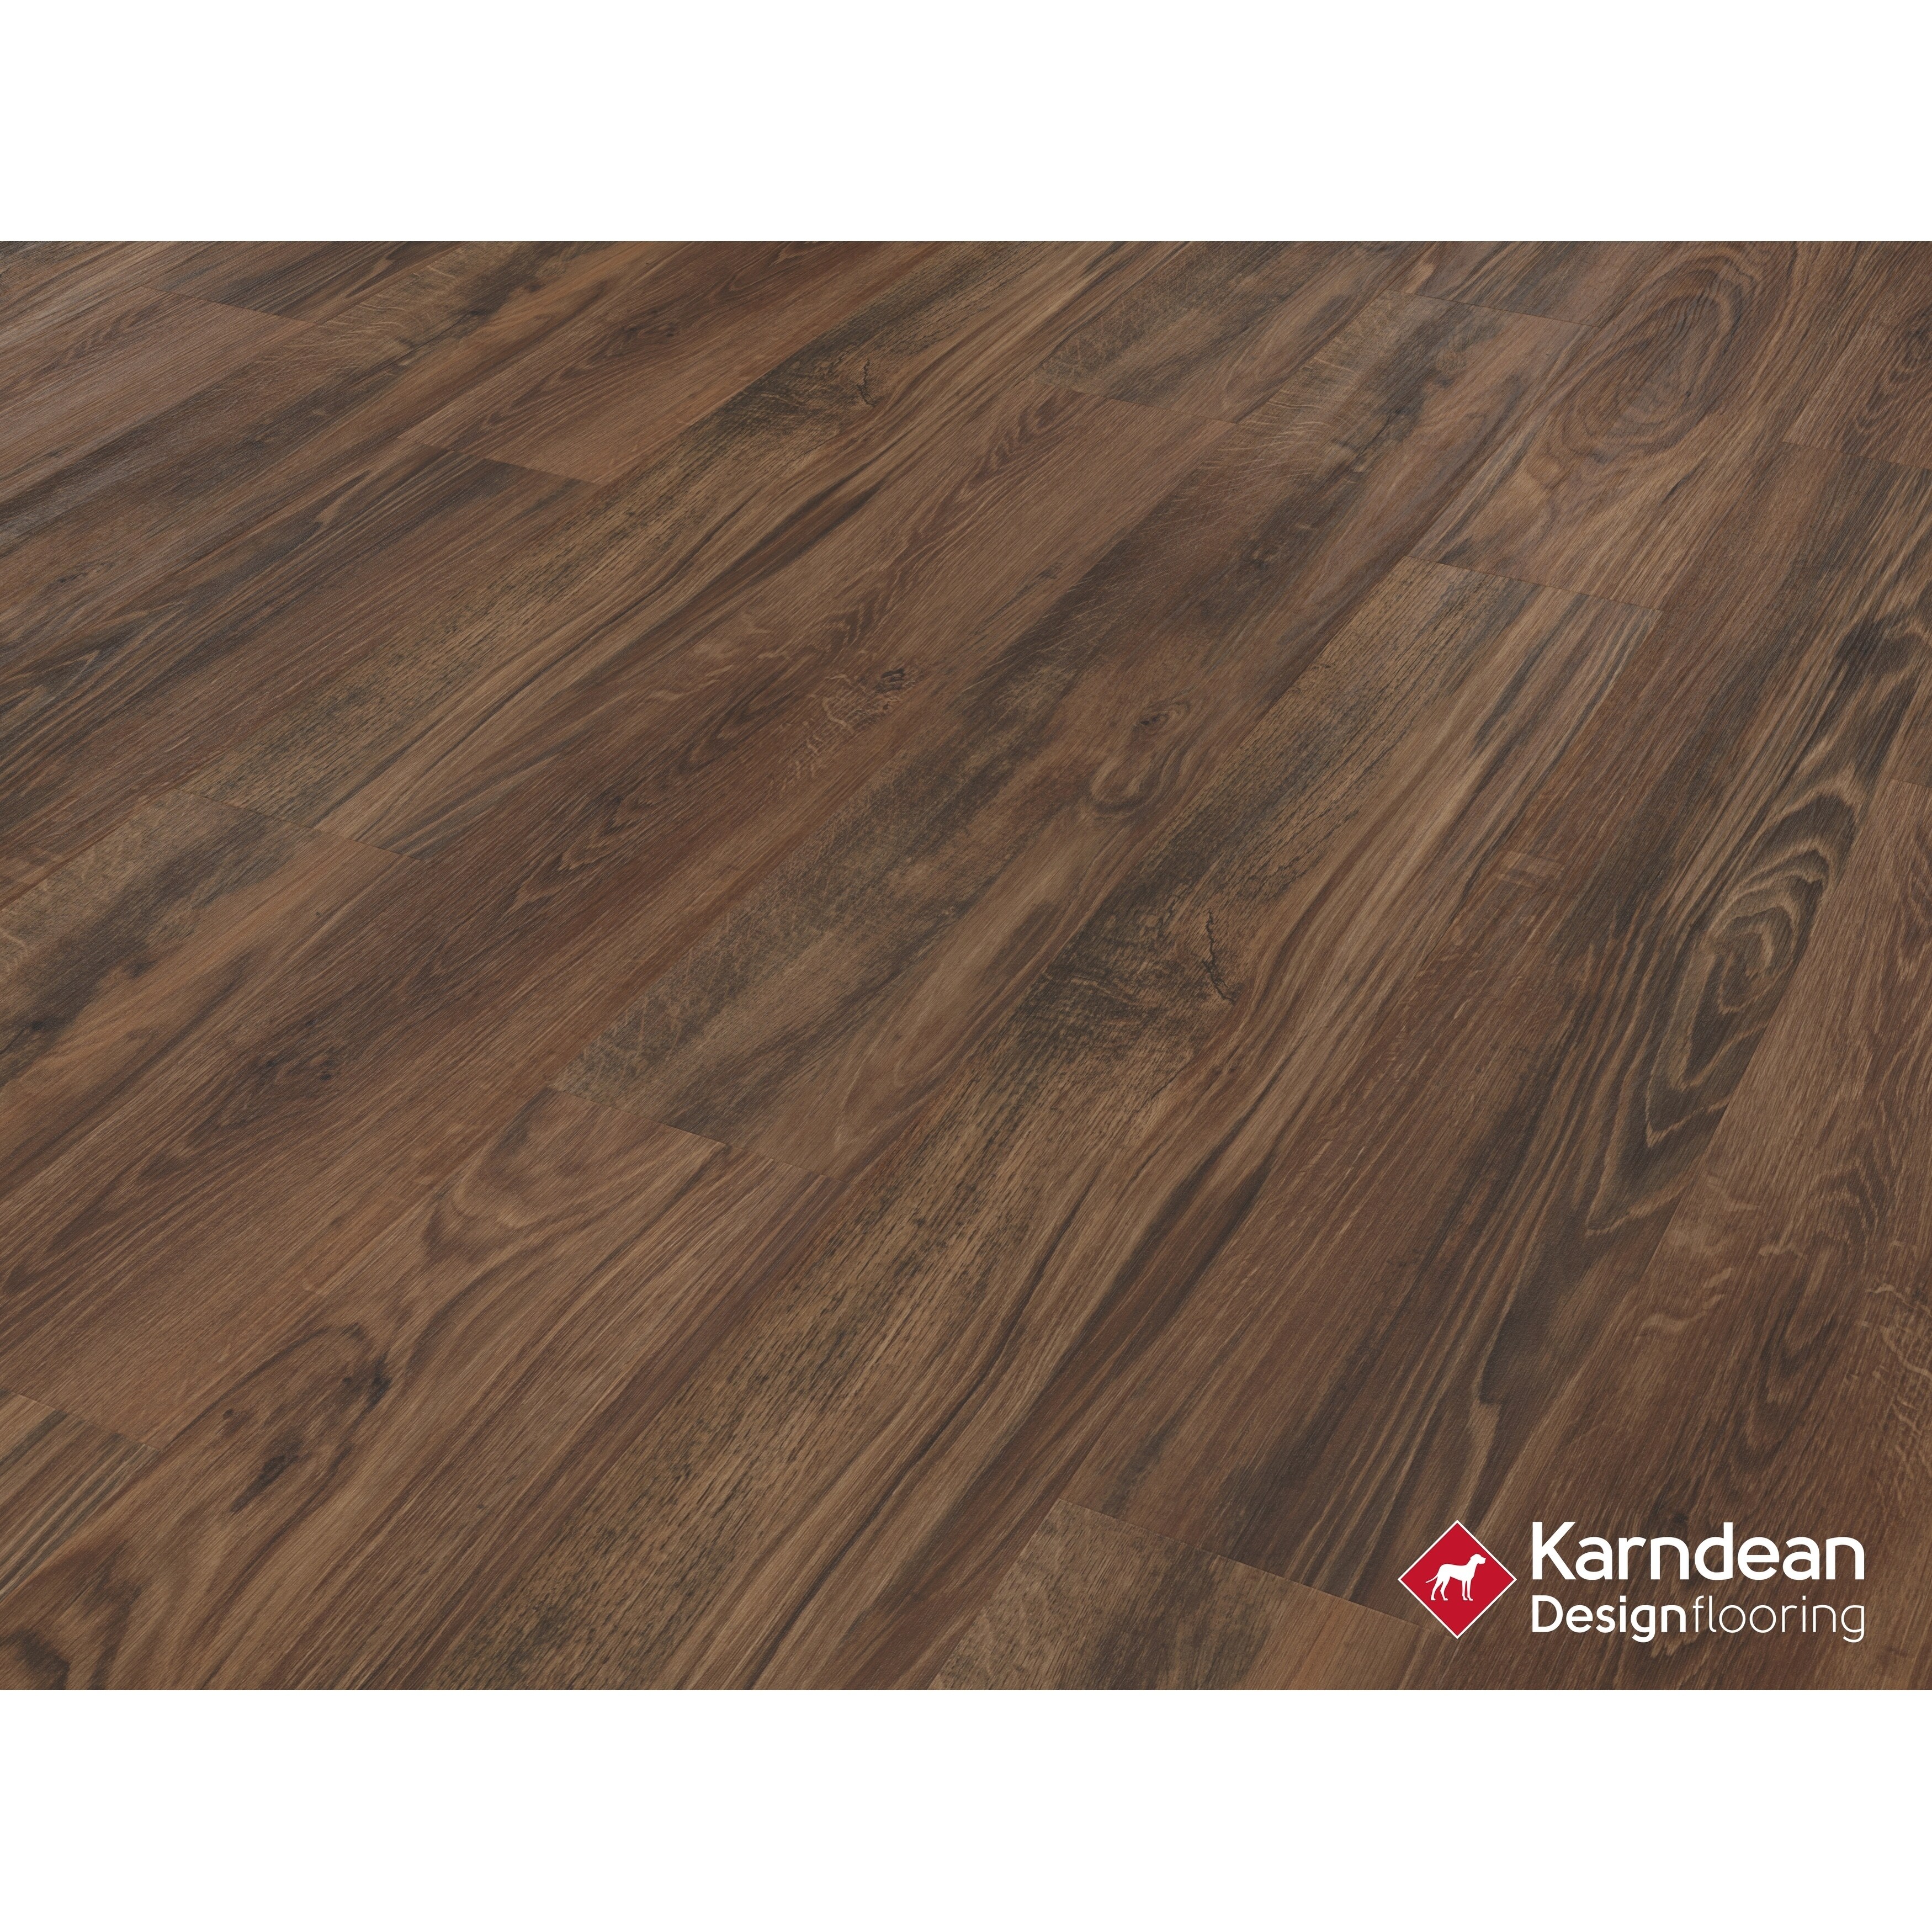 Shop Canaletto By Karndean Designflooring English Leather Oak